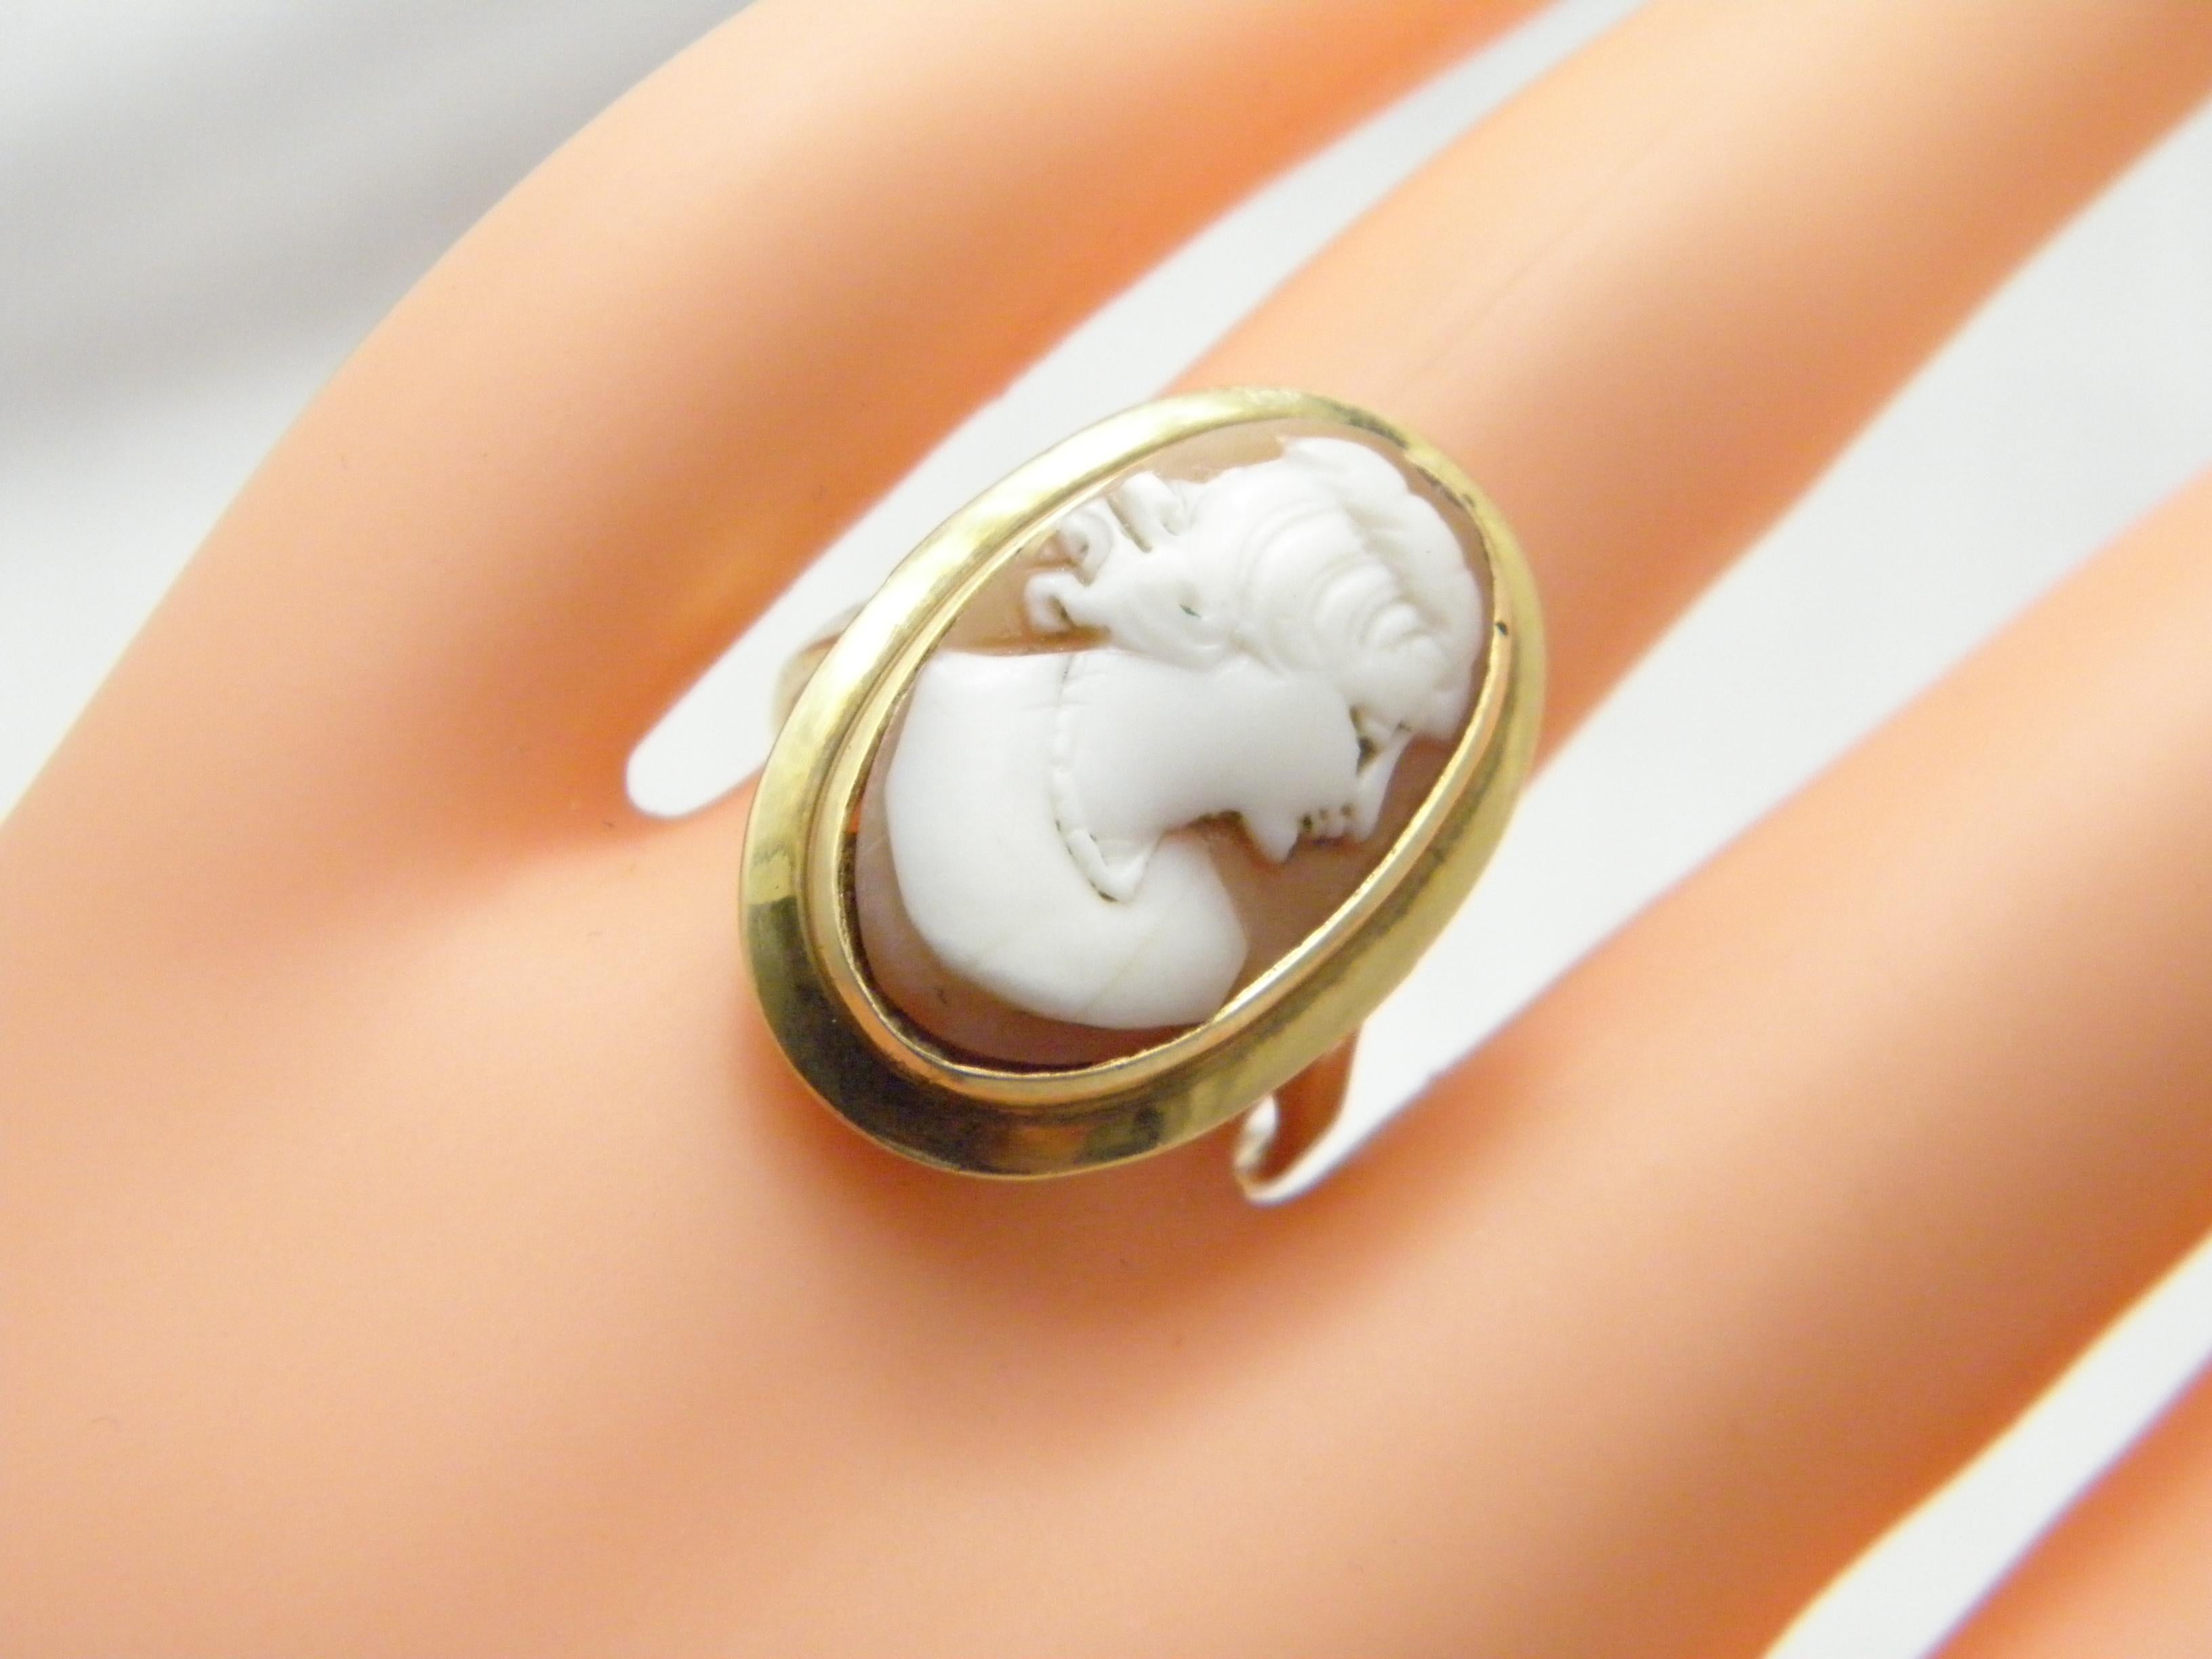 If you have landed on this page then you have an eye for beauty.

On offer is this gorgeous

9CT HUGE GOLD ANTIQUE CARVED SHELL CAMEO SIGNET RING

DETAILS
Material: 9ct 375/000 Yellow Gold
This ring has a very thick and sturdy shank hence ideal if